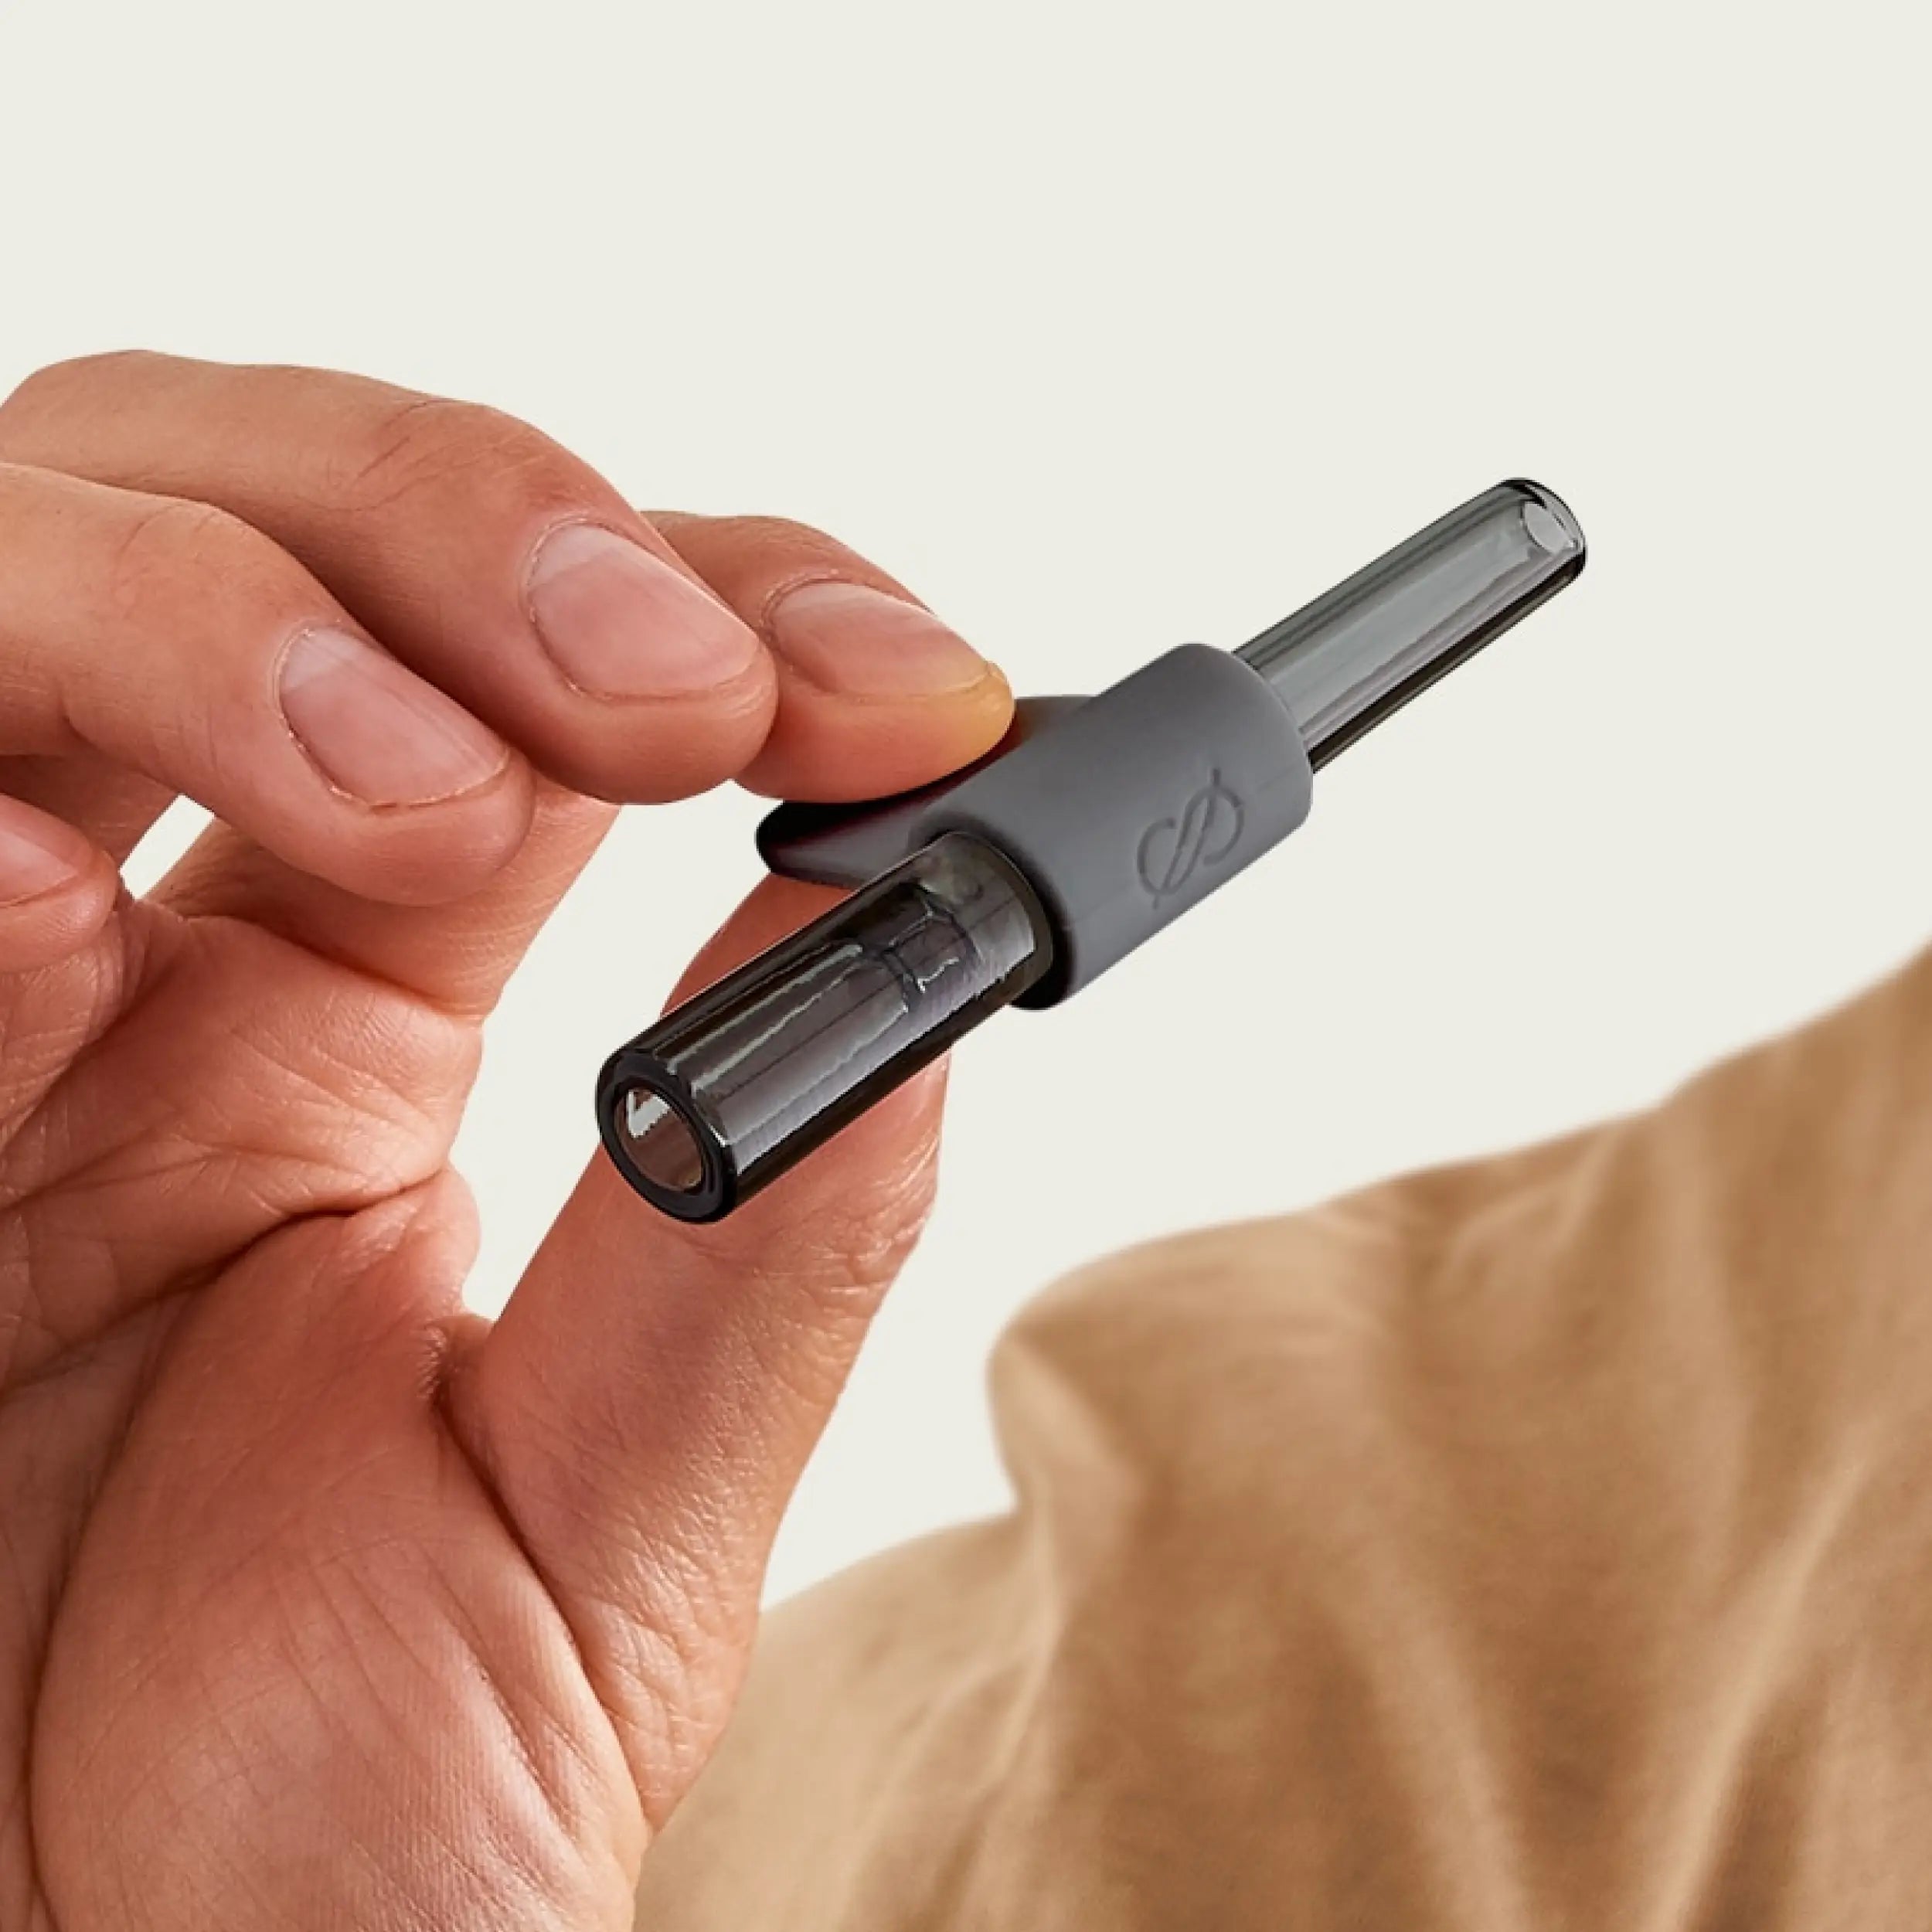 Sleek and Stylish Session One Hitter for On-the-Go Use